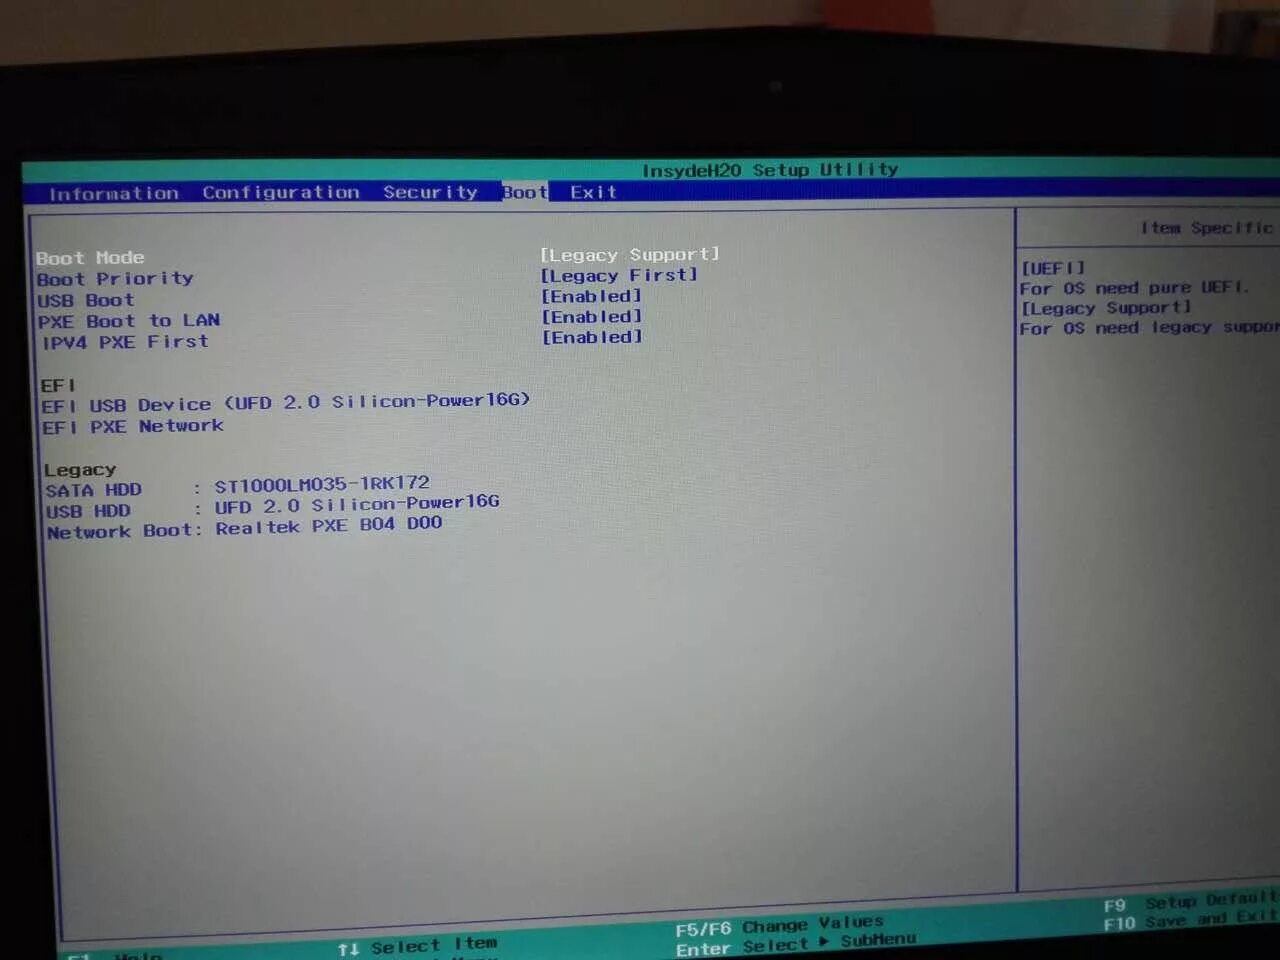 Pxe16. Insydeh20. Network PXE Boot menu. Insydeh20 Setup Utility.